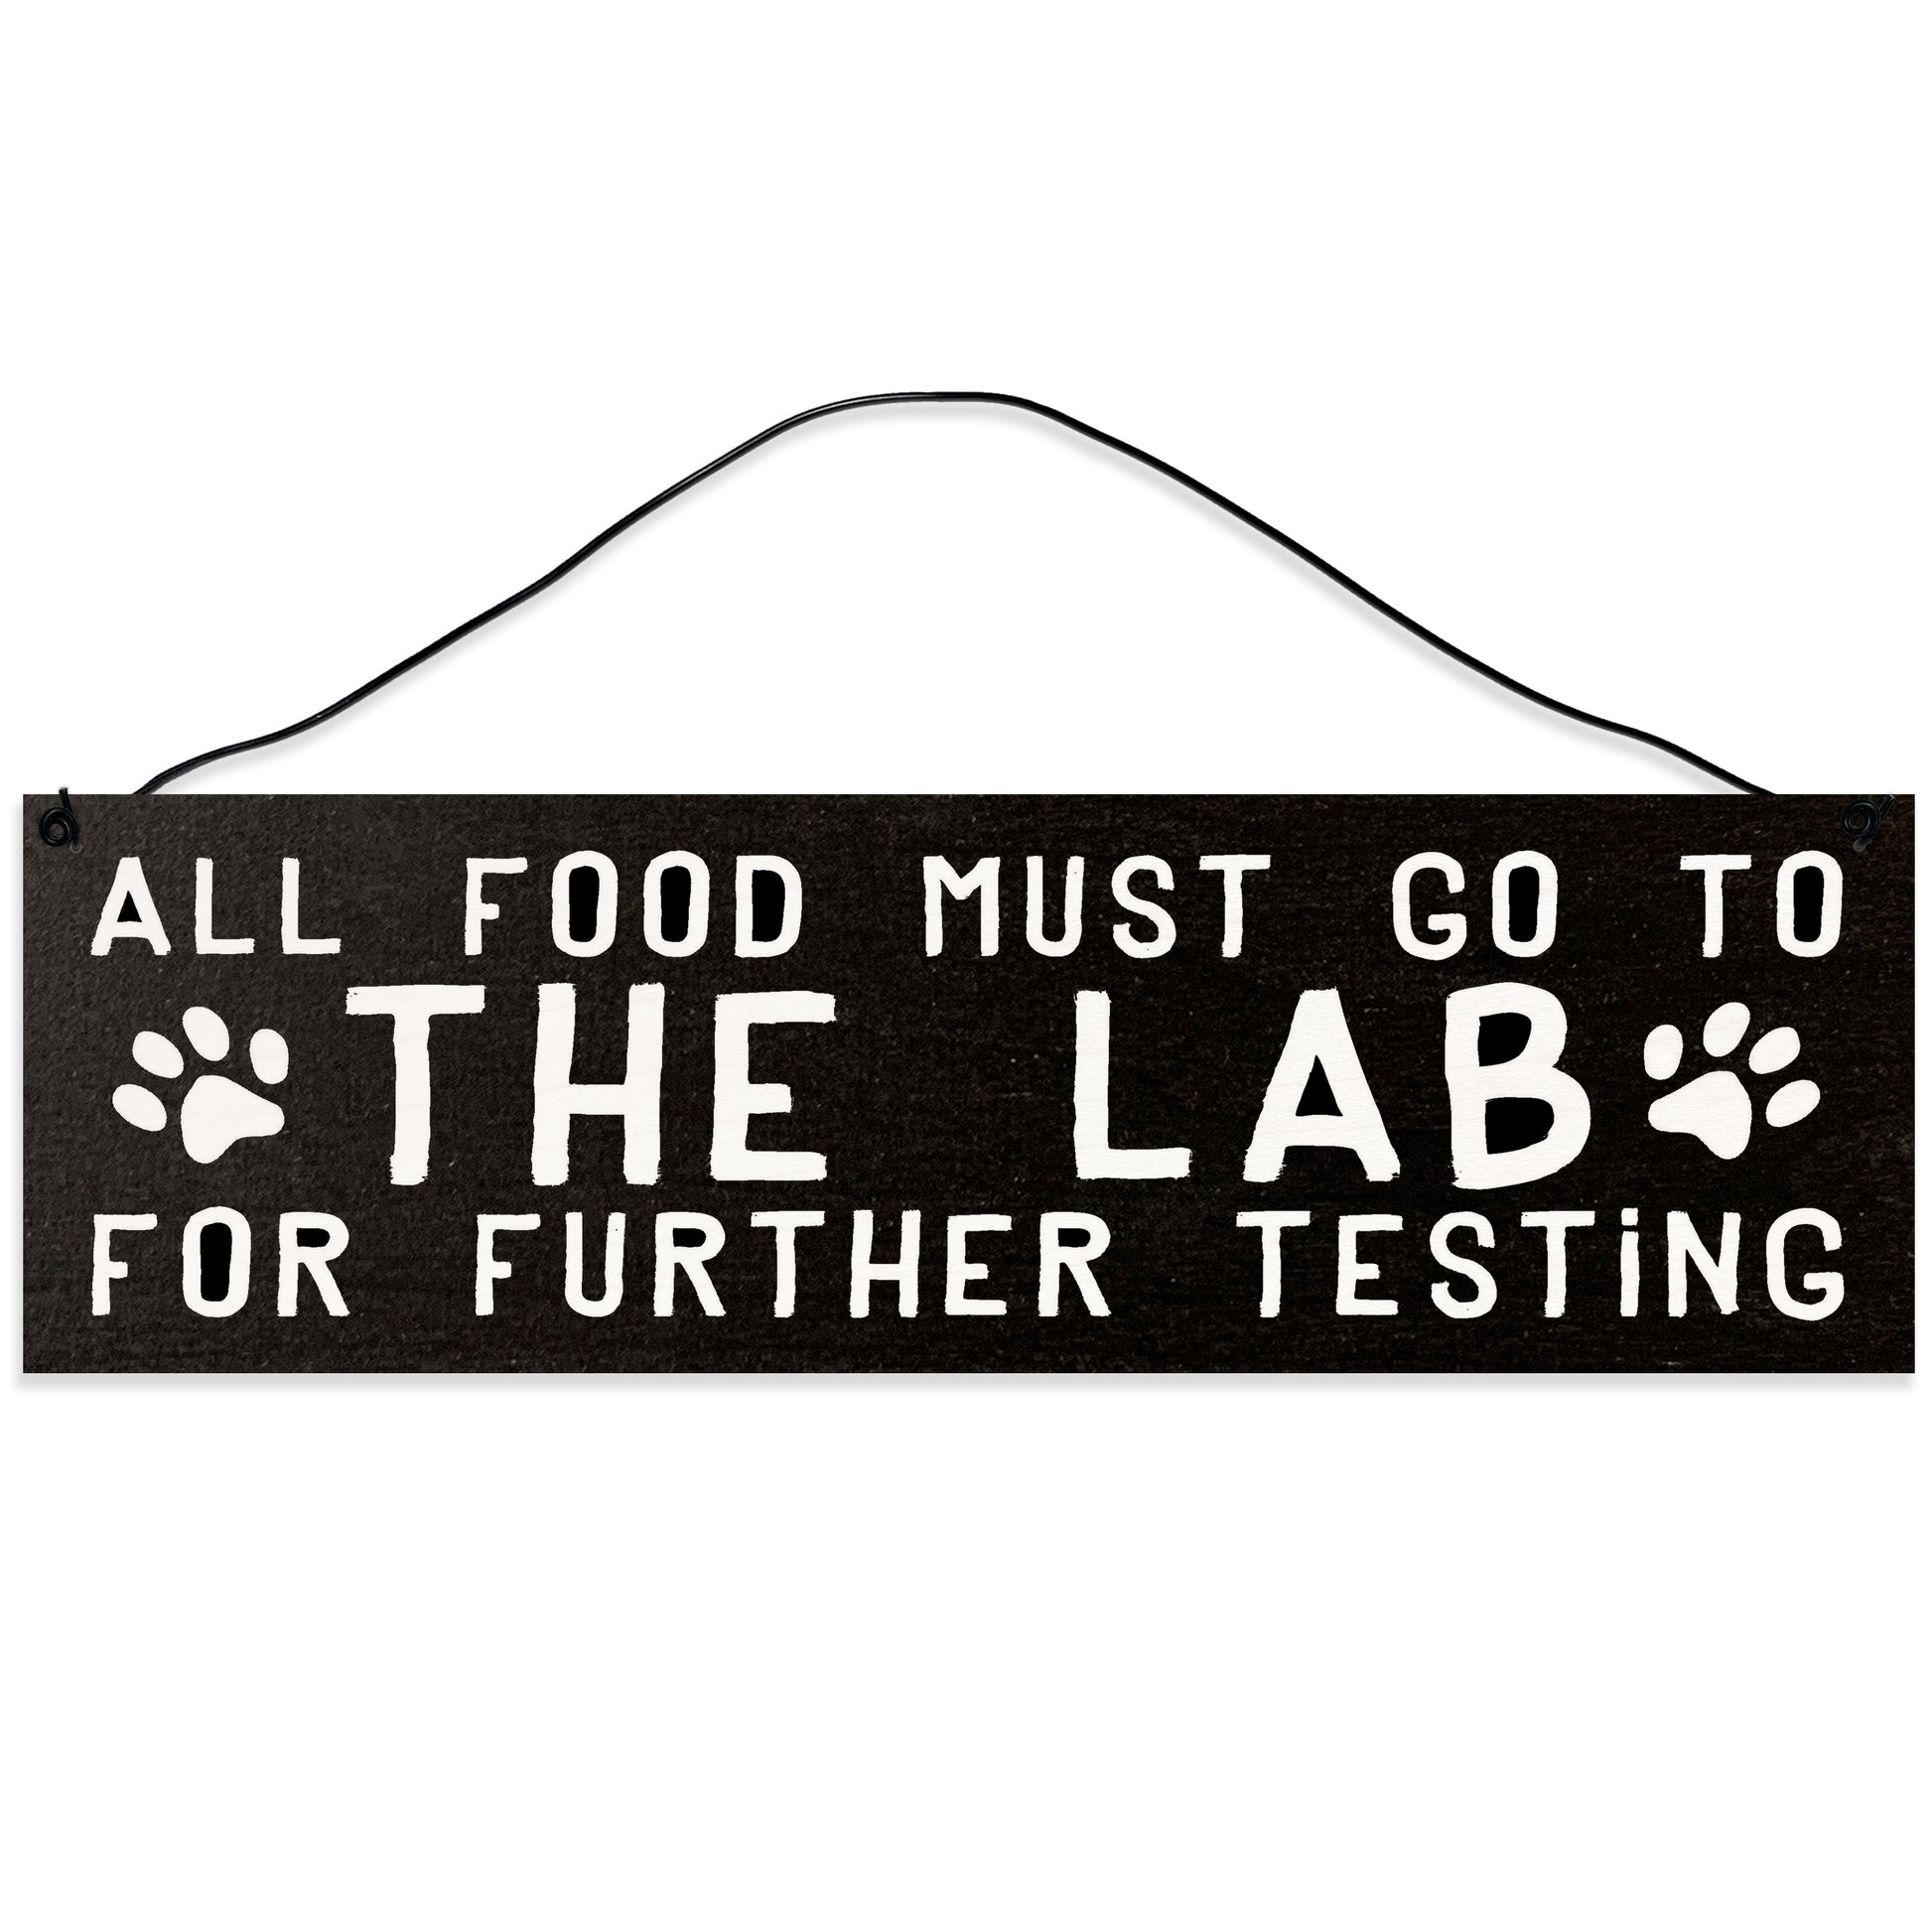 Sawyer's Mill - All Food Must Go to the Lab for Further Testing. Wood Sign for Home or Office. Measures 3x10 inches.